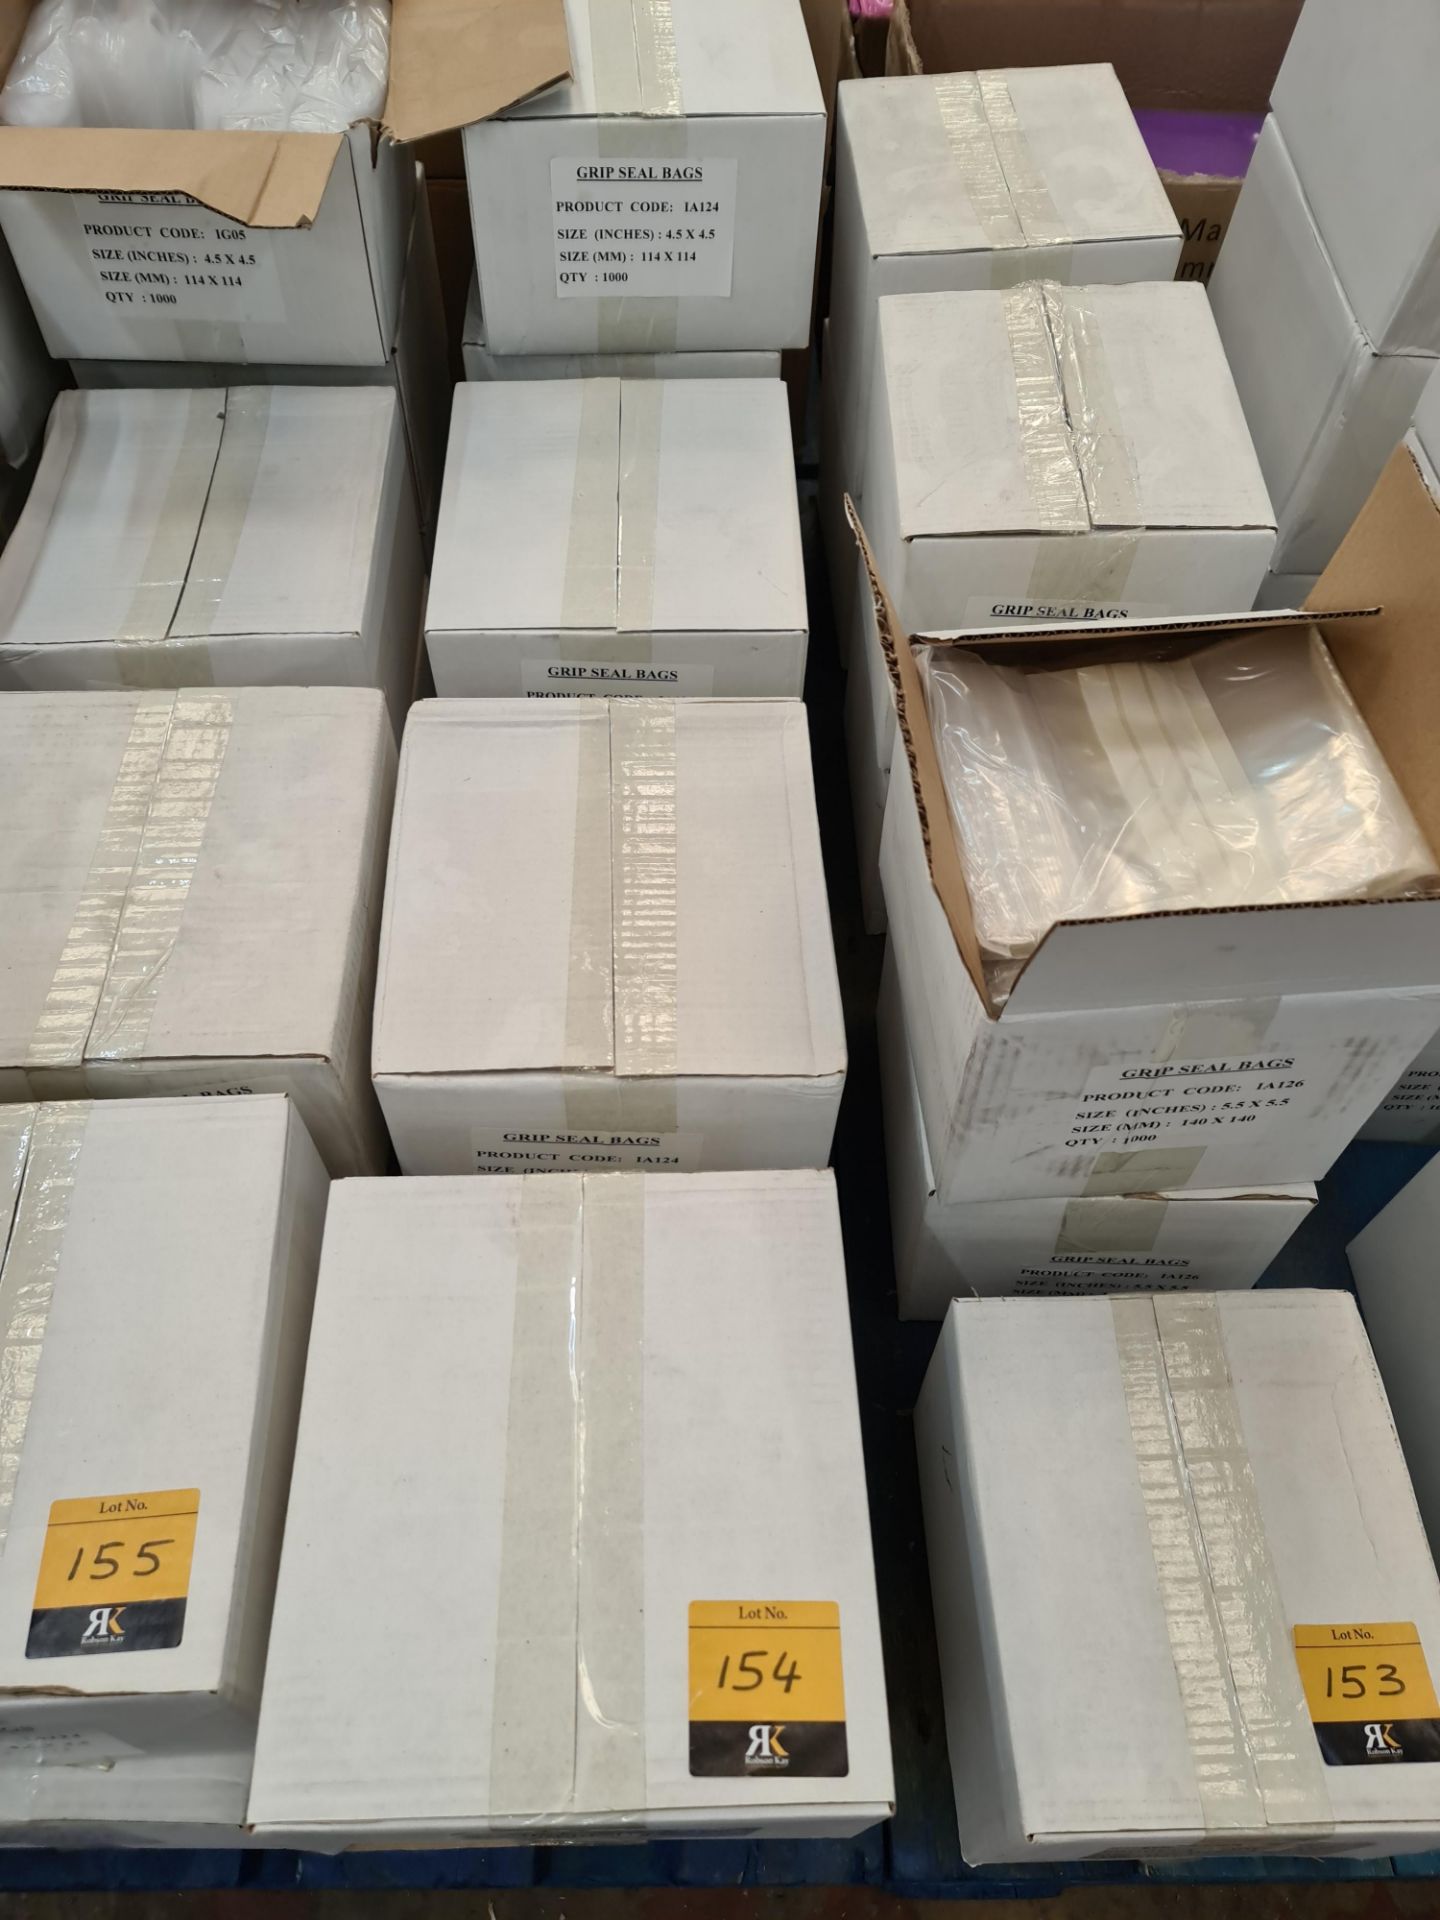 9 boxes of Grip Seal bags - each box contains 1,000 114 x 114mm bags